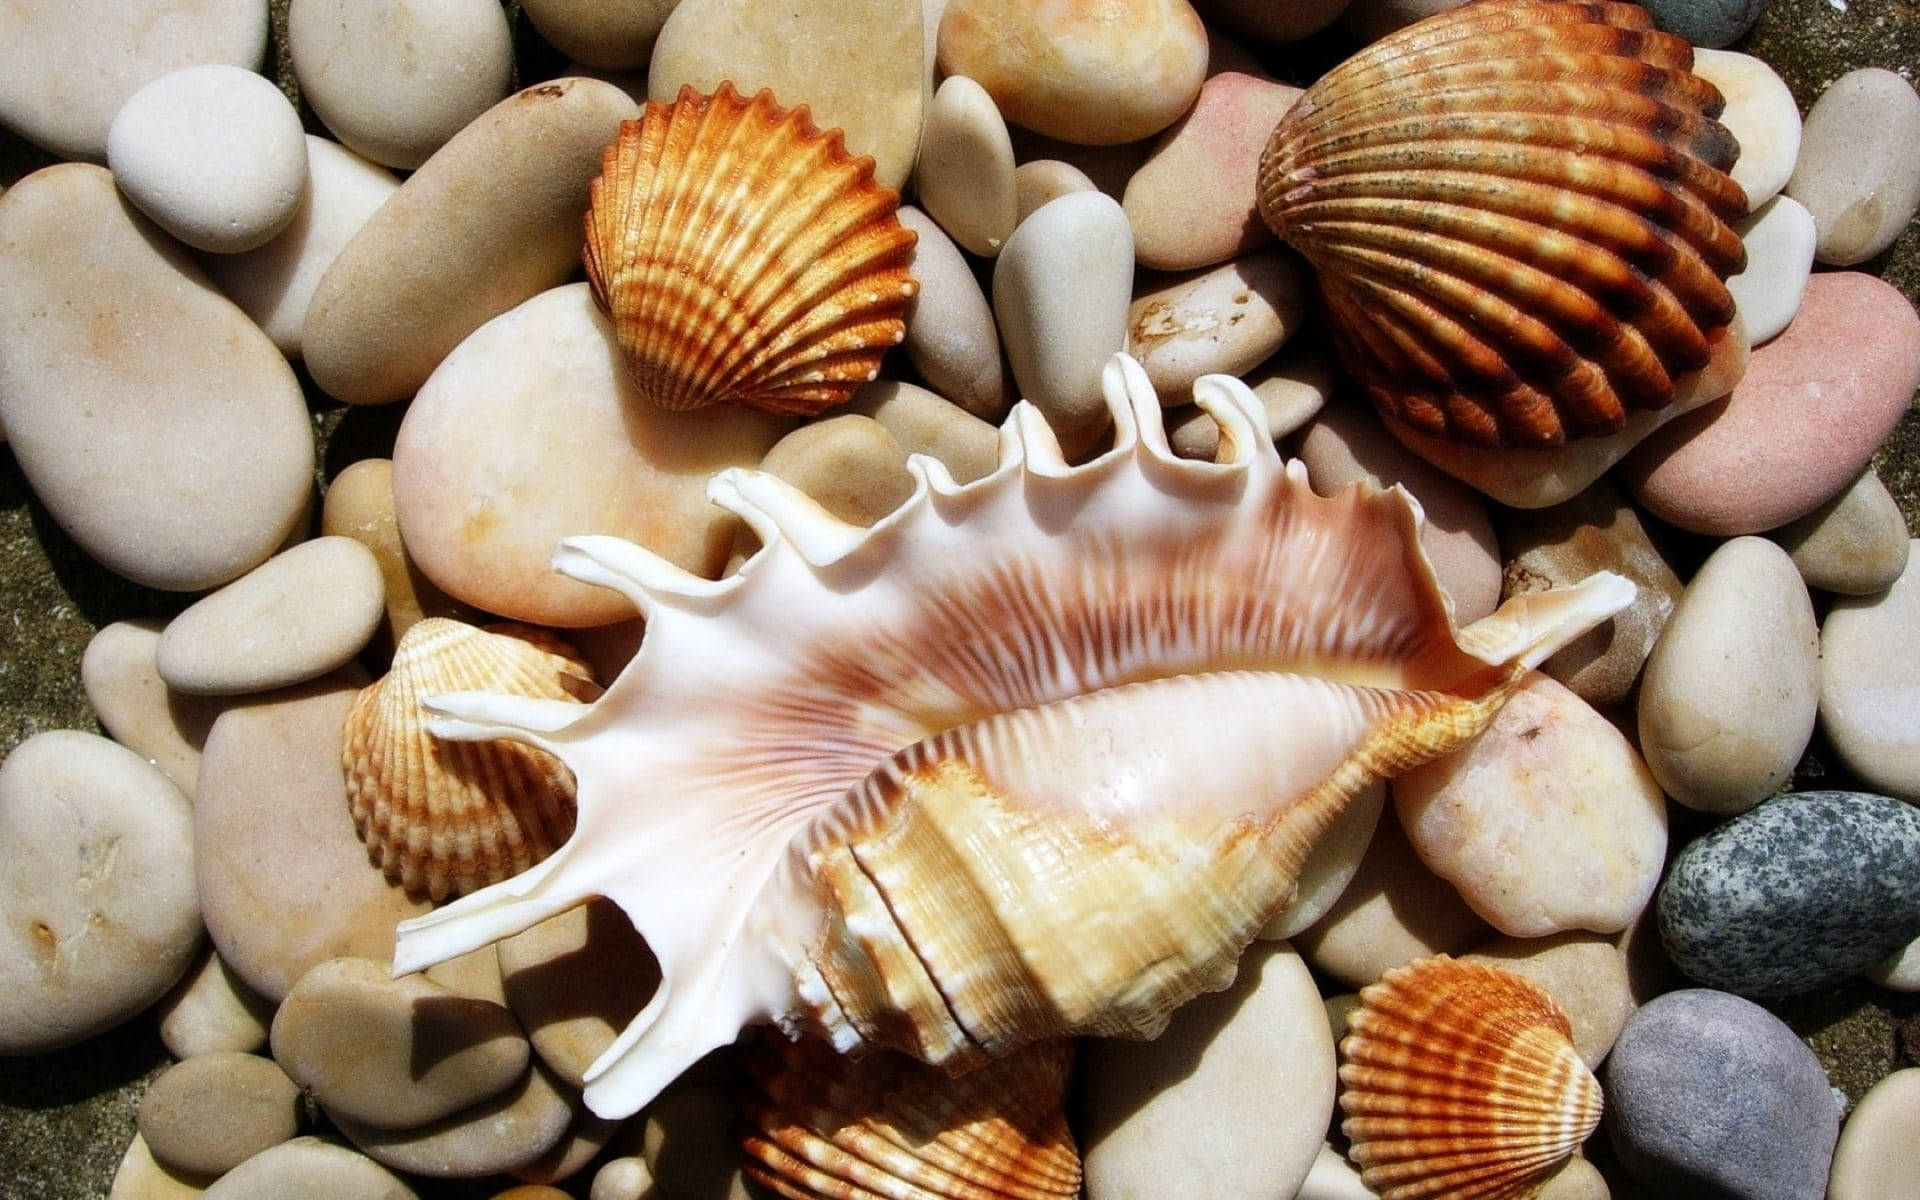 Scallops And Conch Shells On Pebbles Wallpaper